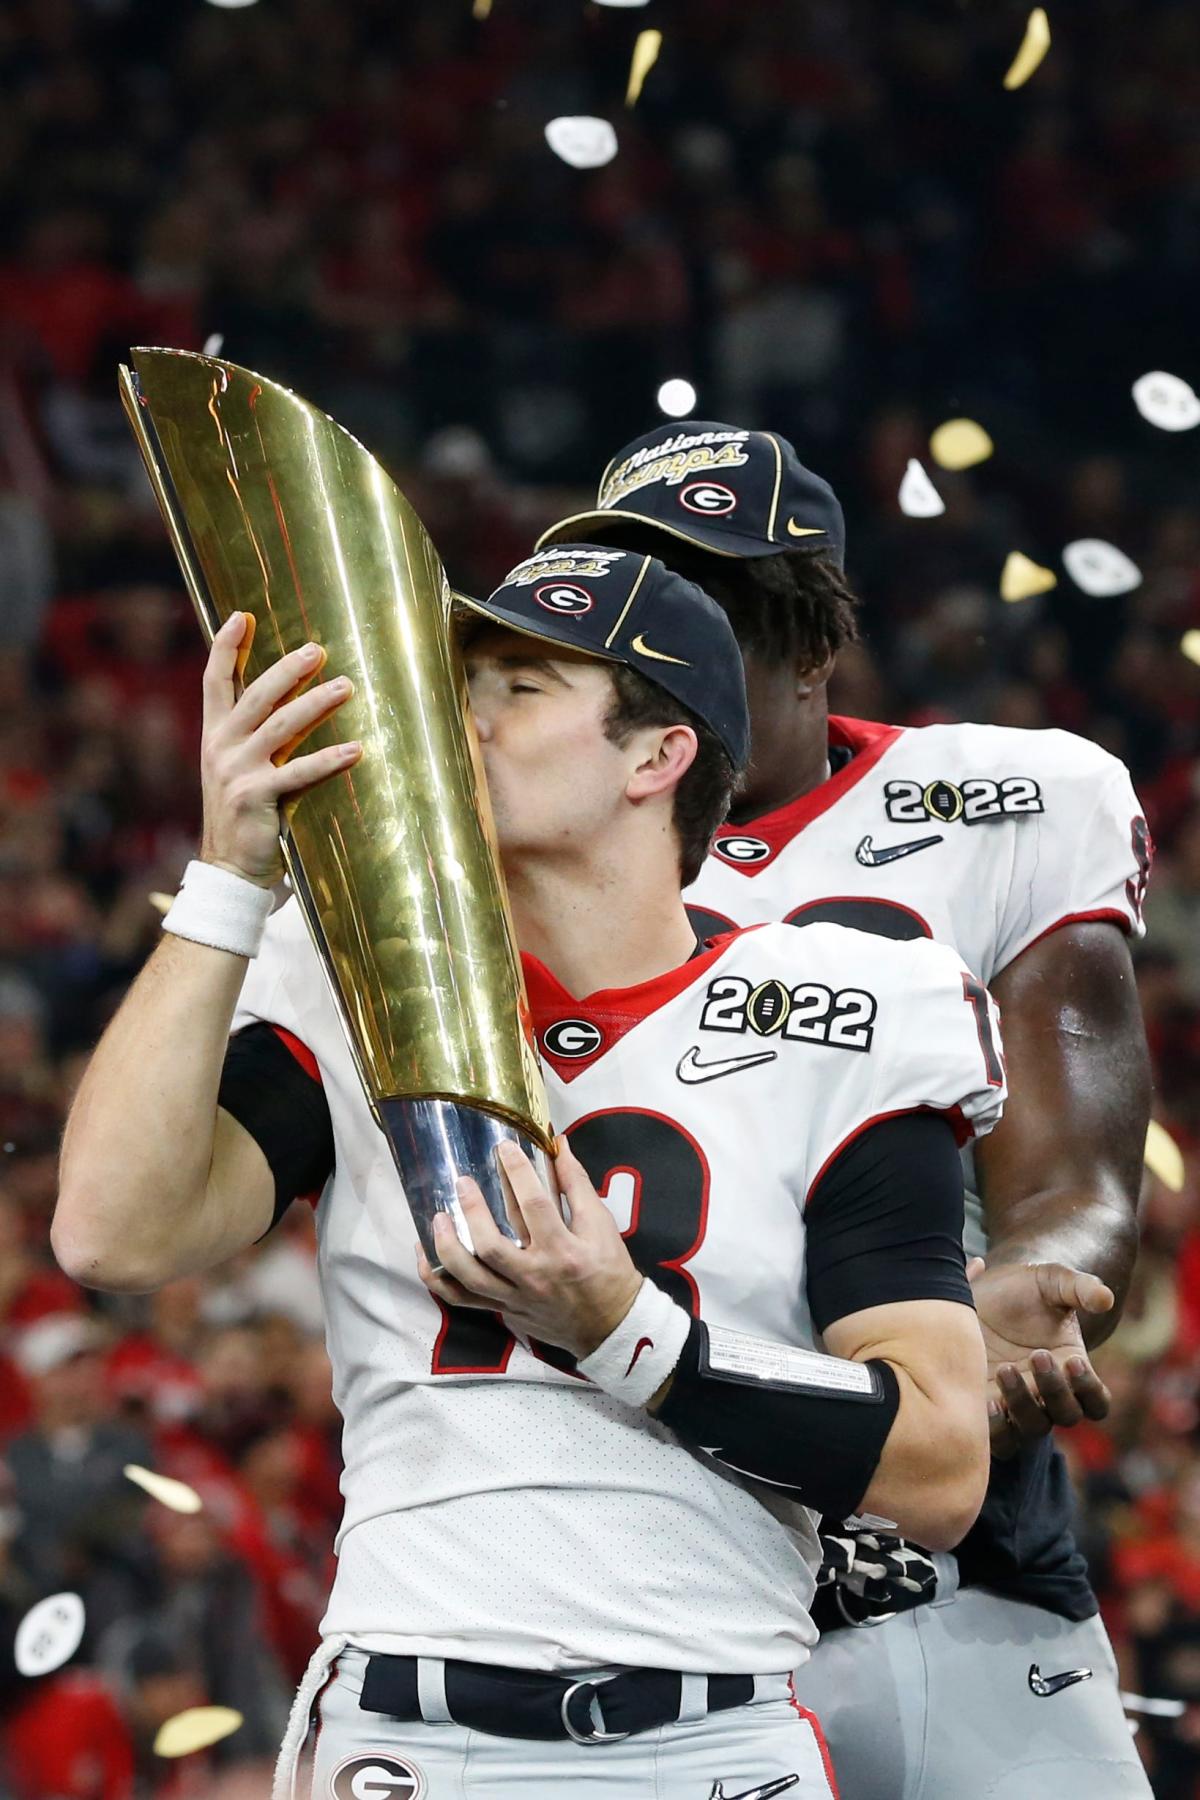 Here's how you can get a picture with Georgia's national championship trophy